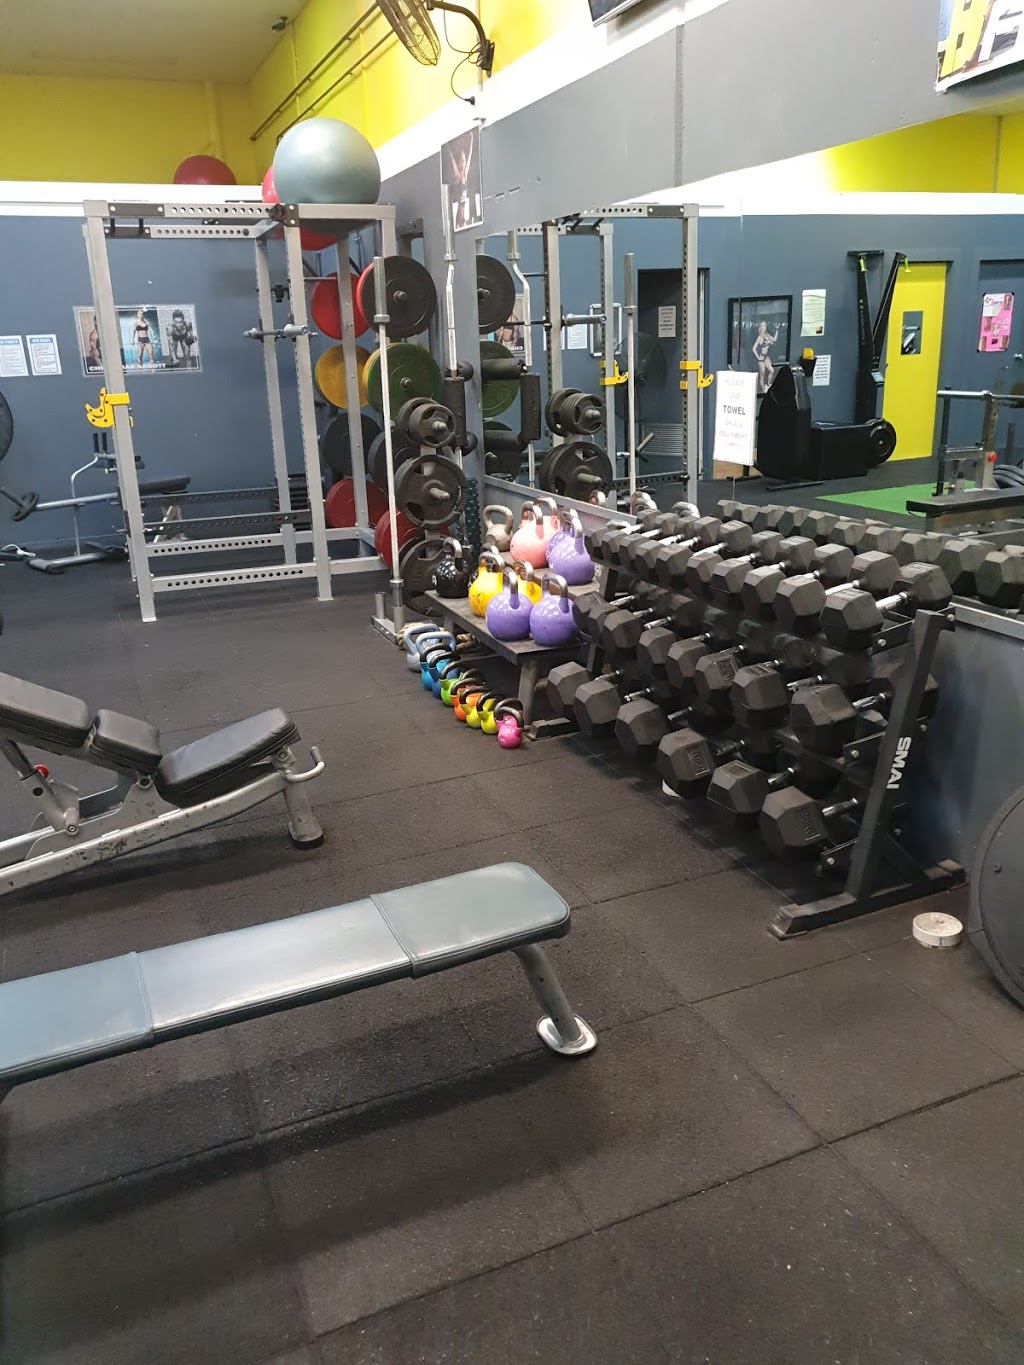 Bfit Health Club | gym | Henry Parks Plaza, 182 Rouse St, Tenterfield NSW 2372, Australia | 0403738044 OR +61 403 738 044